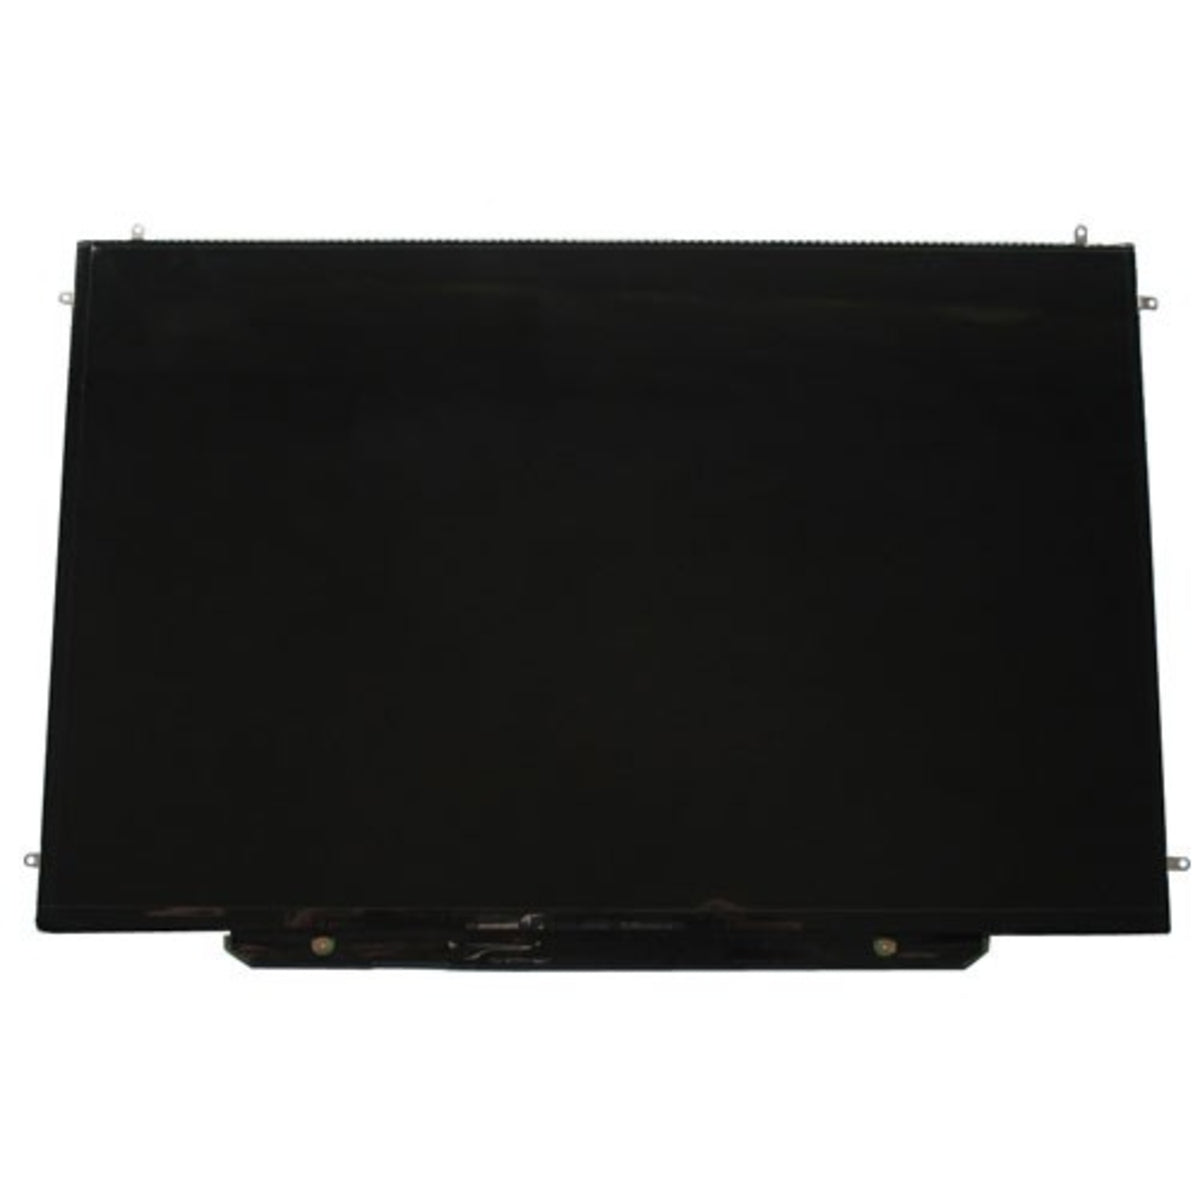 New LCD Screen LP154WE3-TLA2 For Apple MacBook PRO 15" A1286 LATE 2008-MID 2012